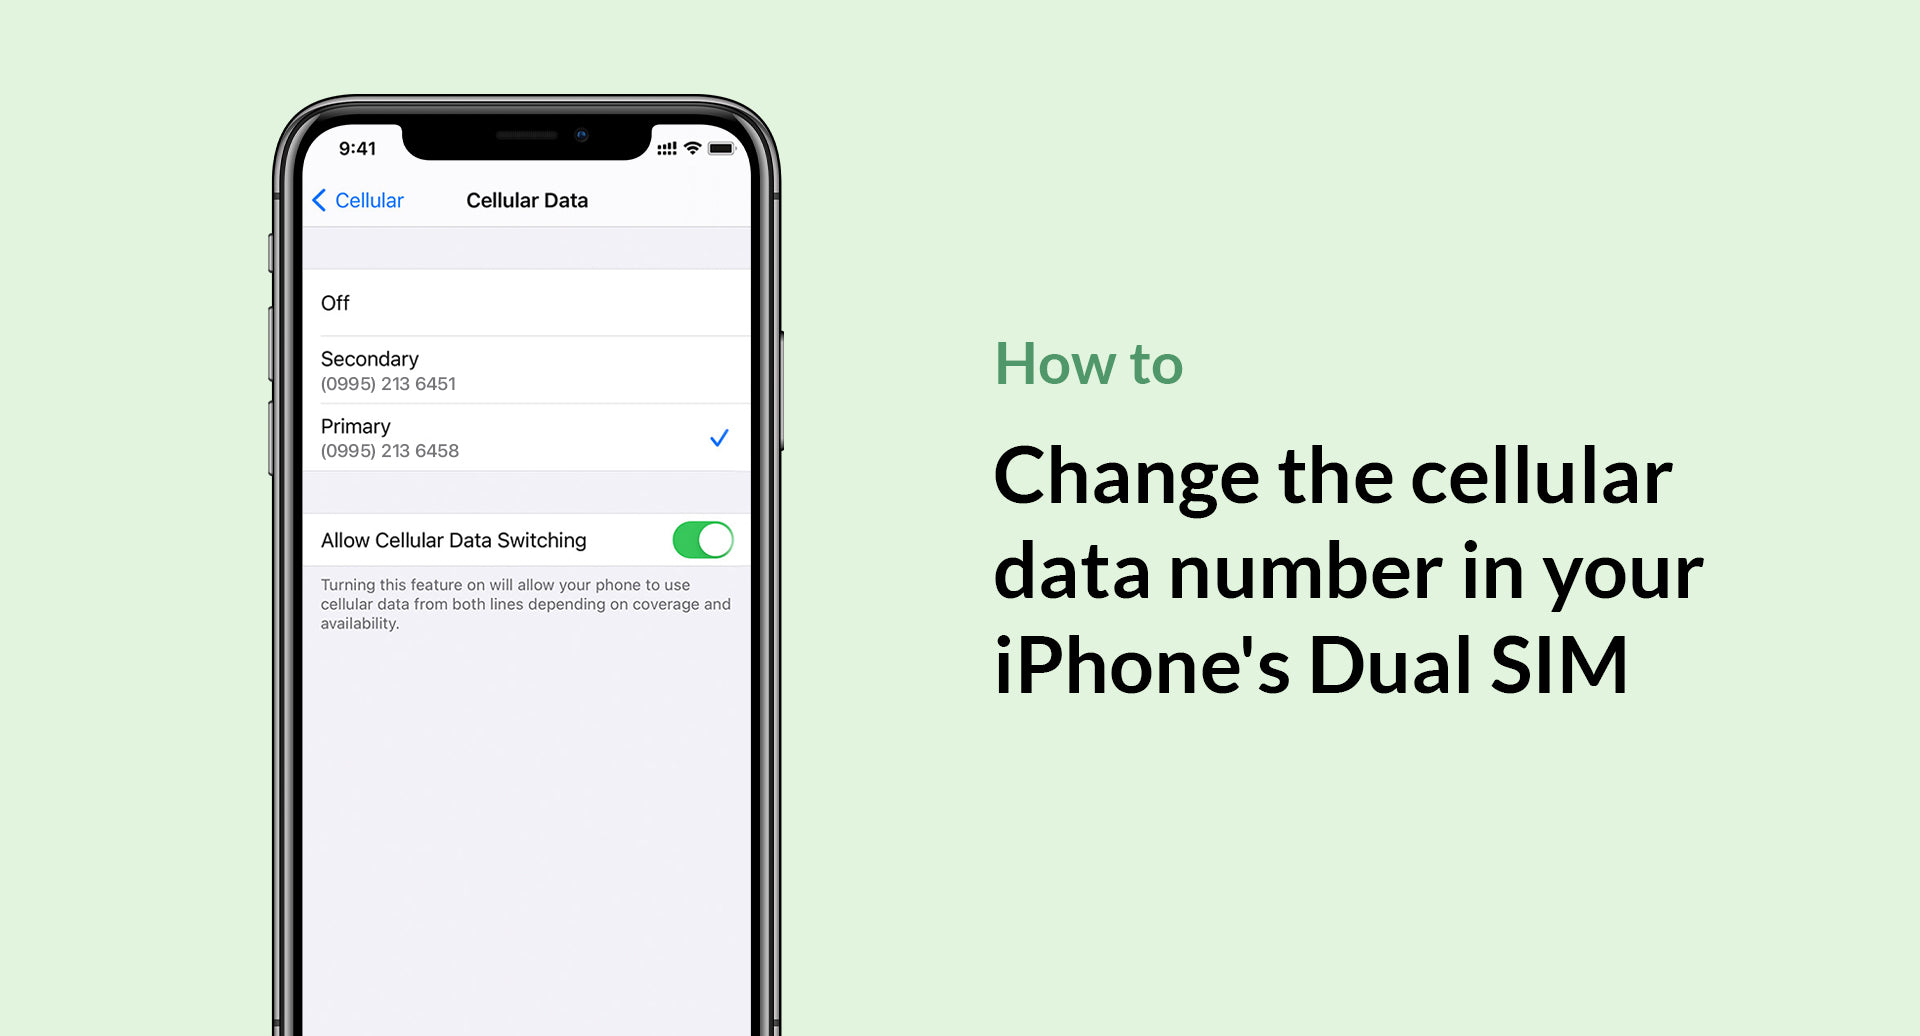 How to change the cellular data number in your iPhone's Dual SIM